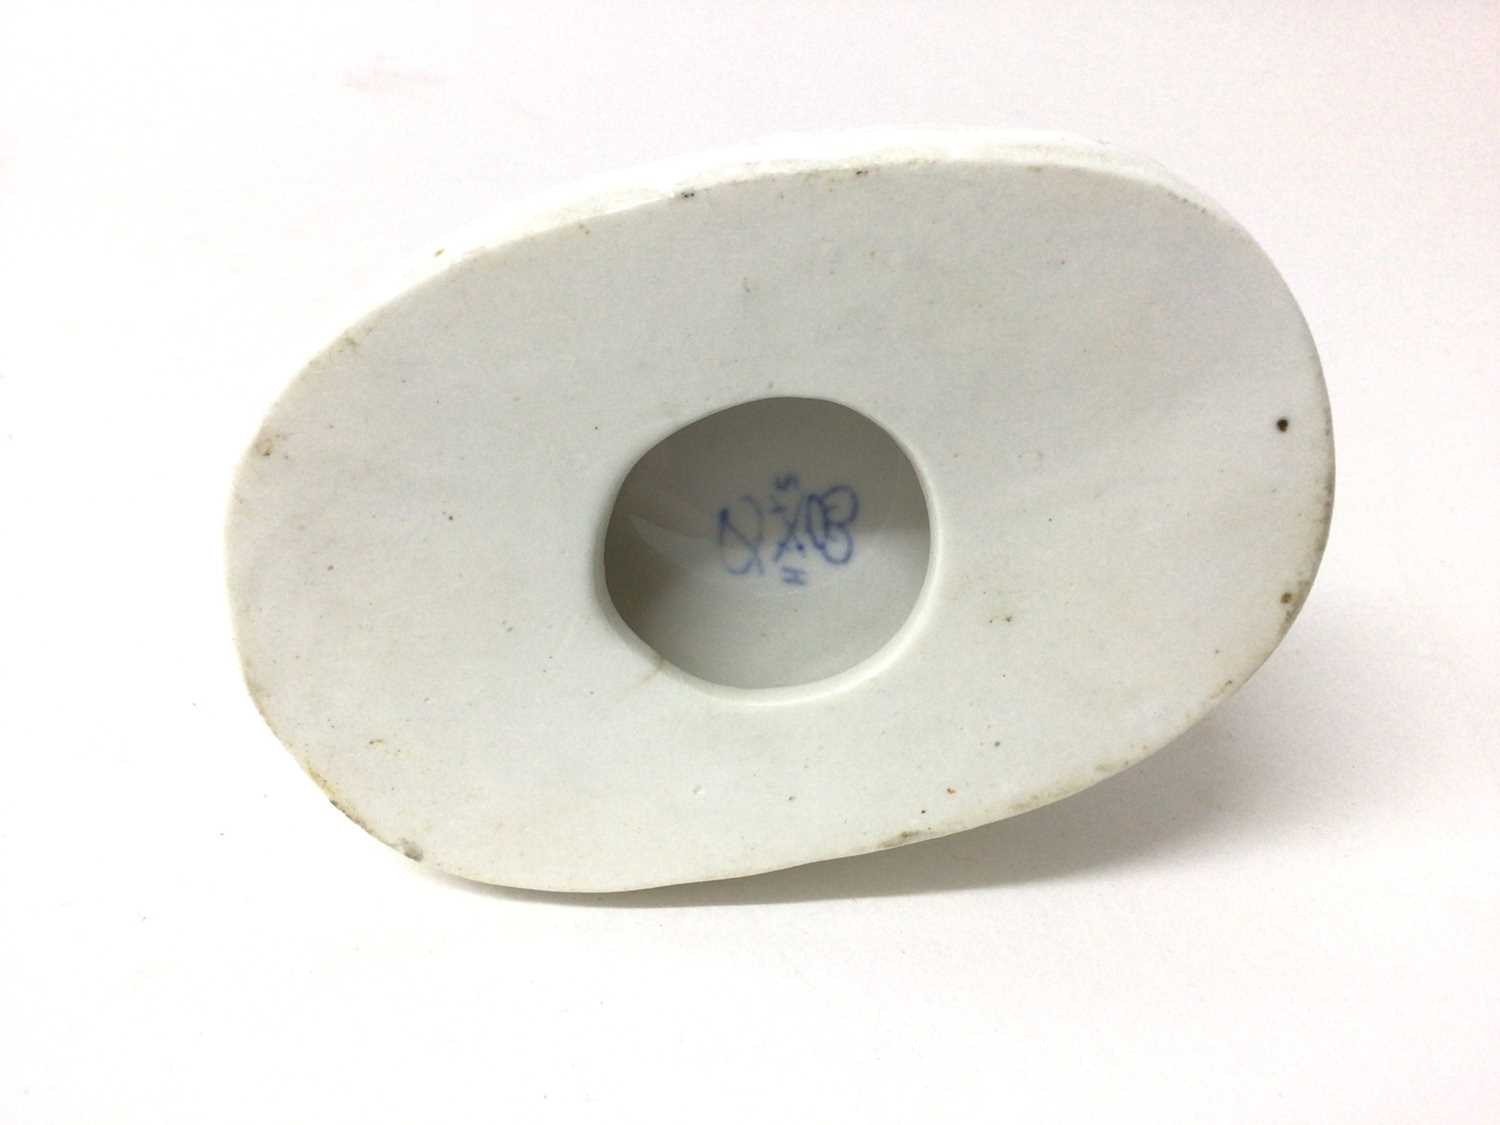 Derby Stephenson & Hancock white glazed model of a dog, shown seated on an oval base, inscribed mark - Image 3 of 3